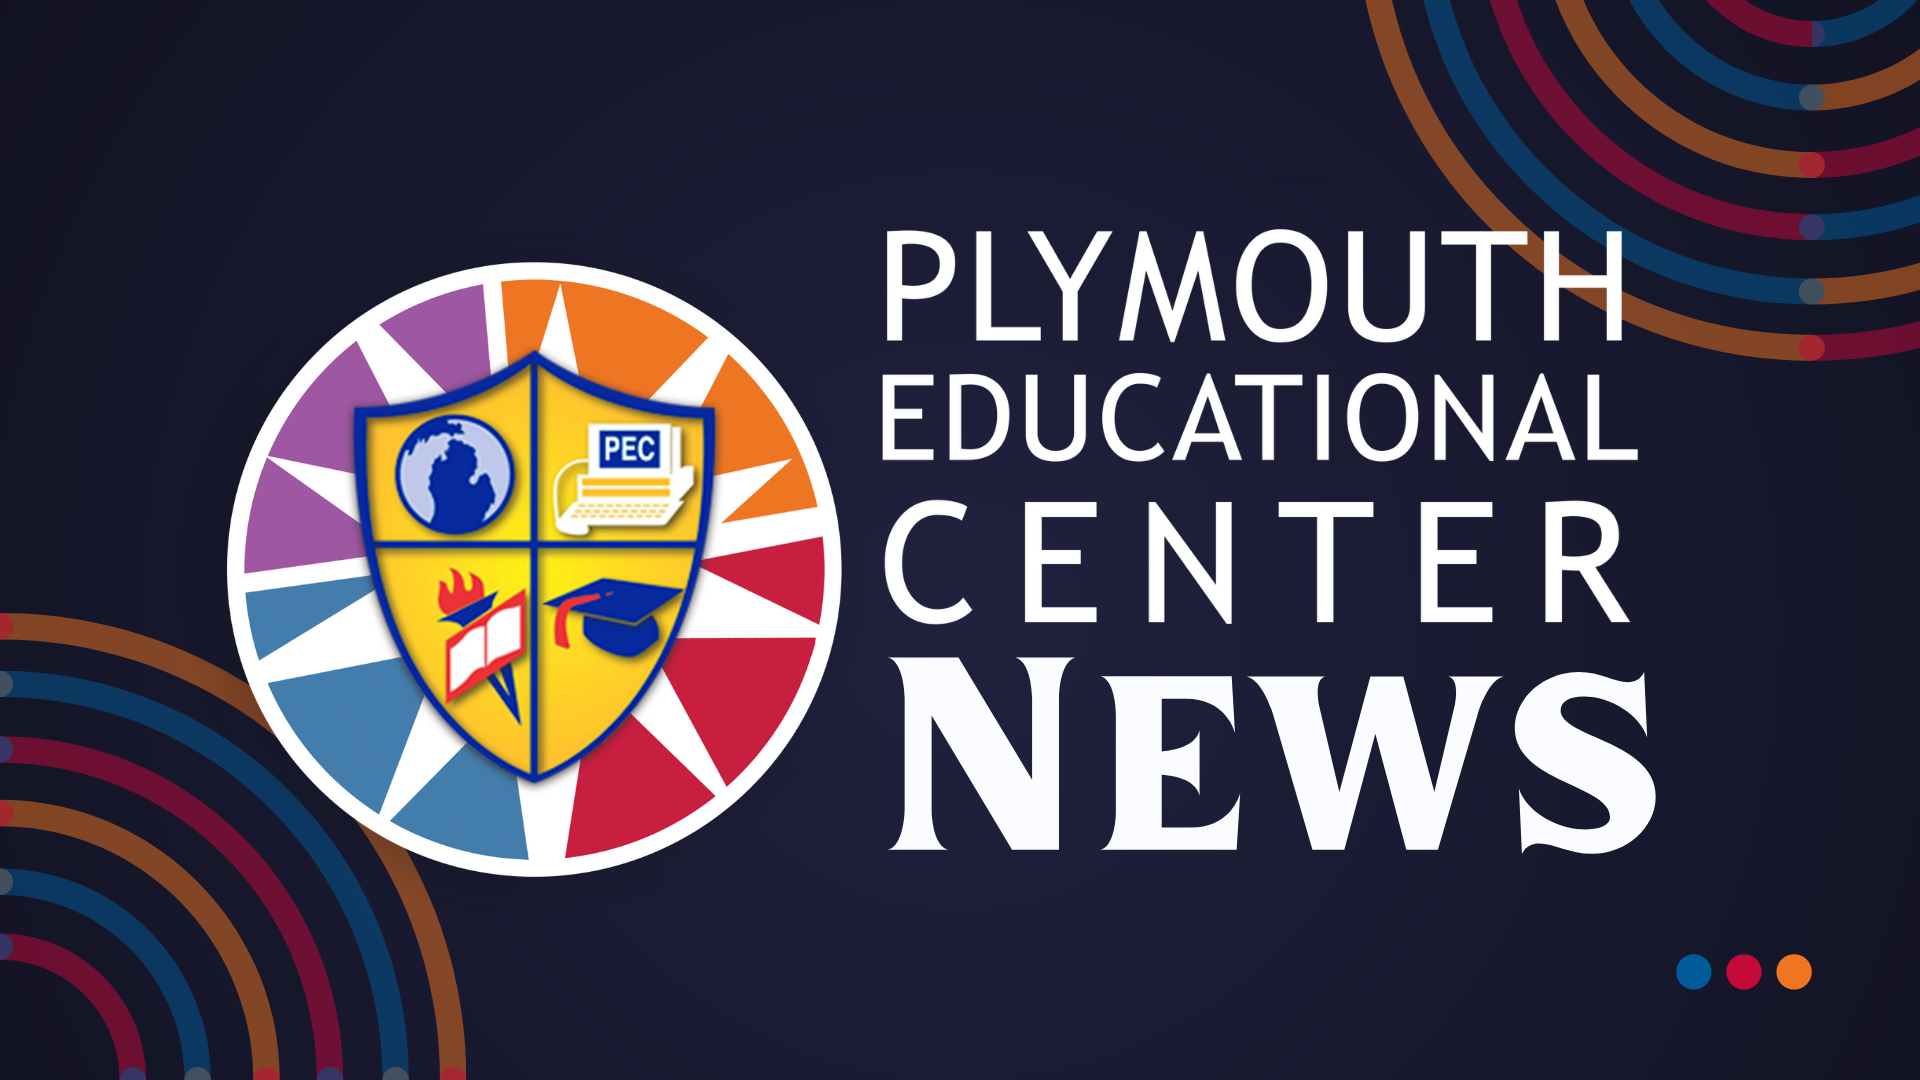 Plymouth Educational Center